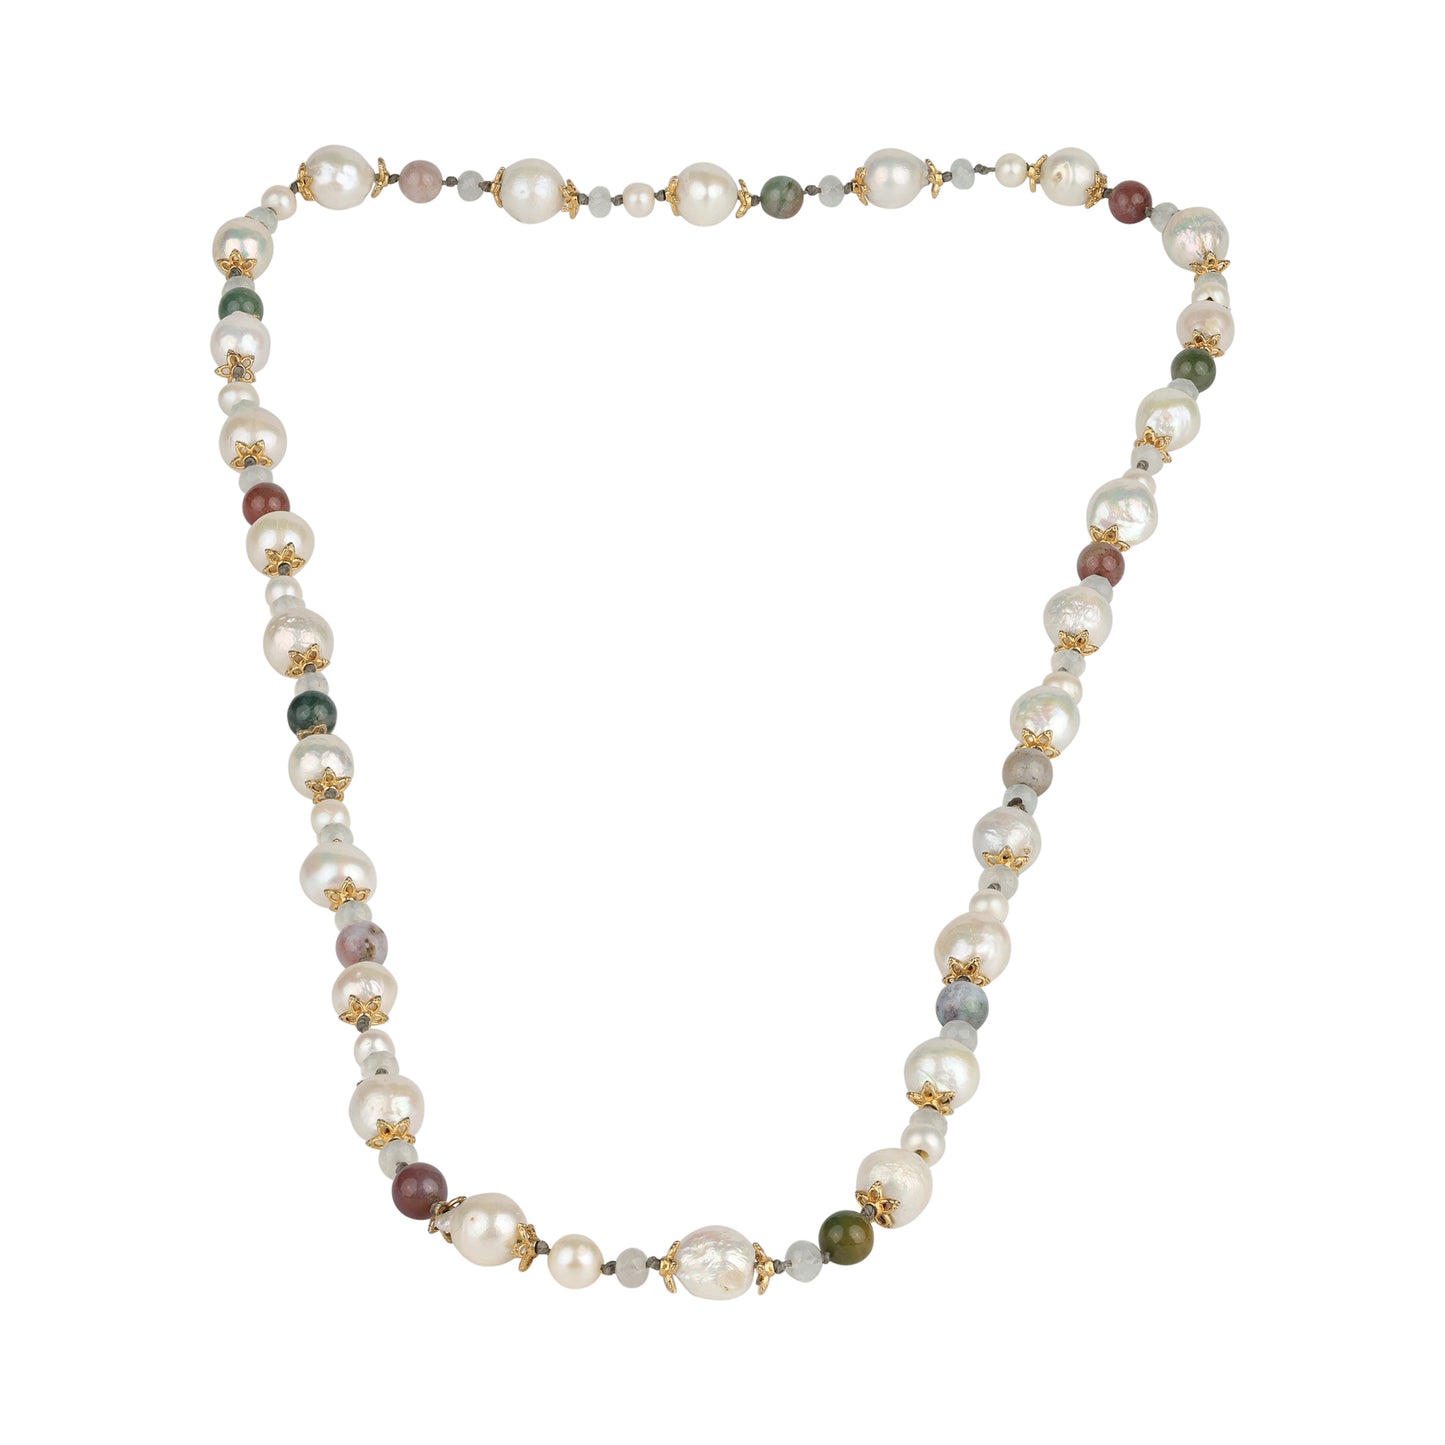 Long necklace with Freshwater pearls, gold-plated flowers, multicolored tourmaline and Labradorit beads